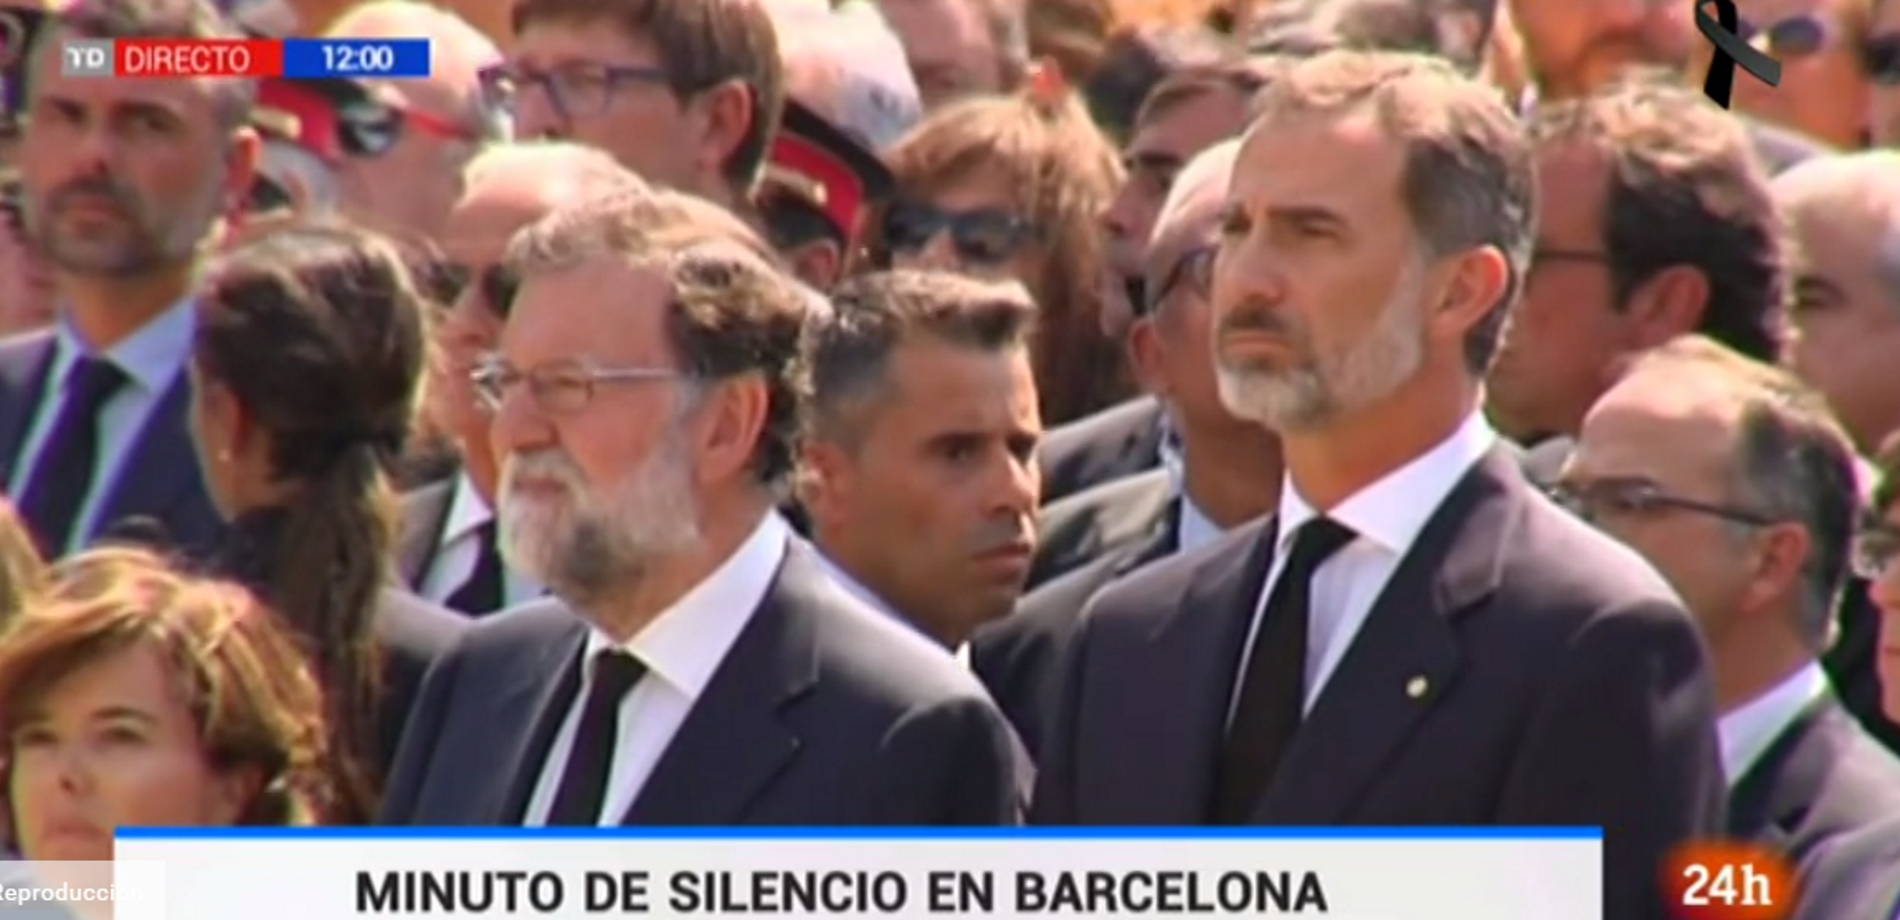 Catalan TV to broadcast demonstration worldwide despite Spain's attempts to prevent it